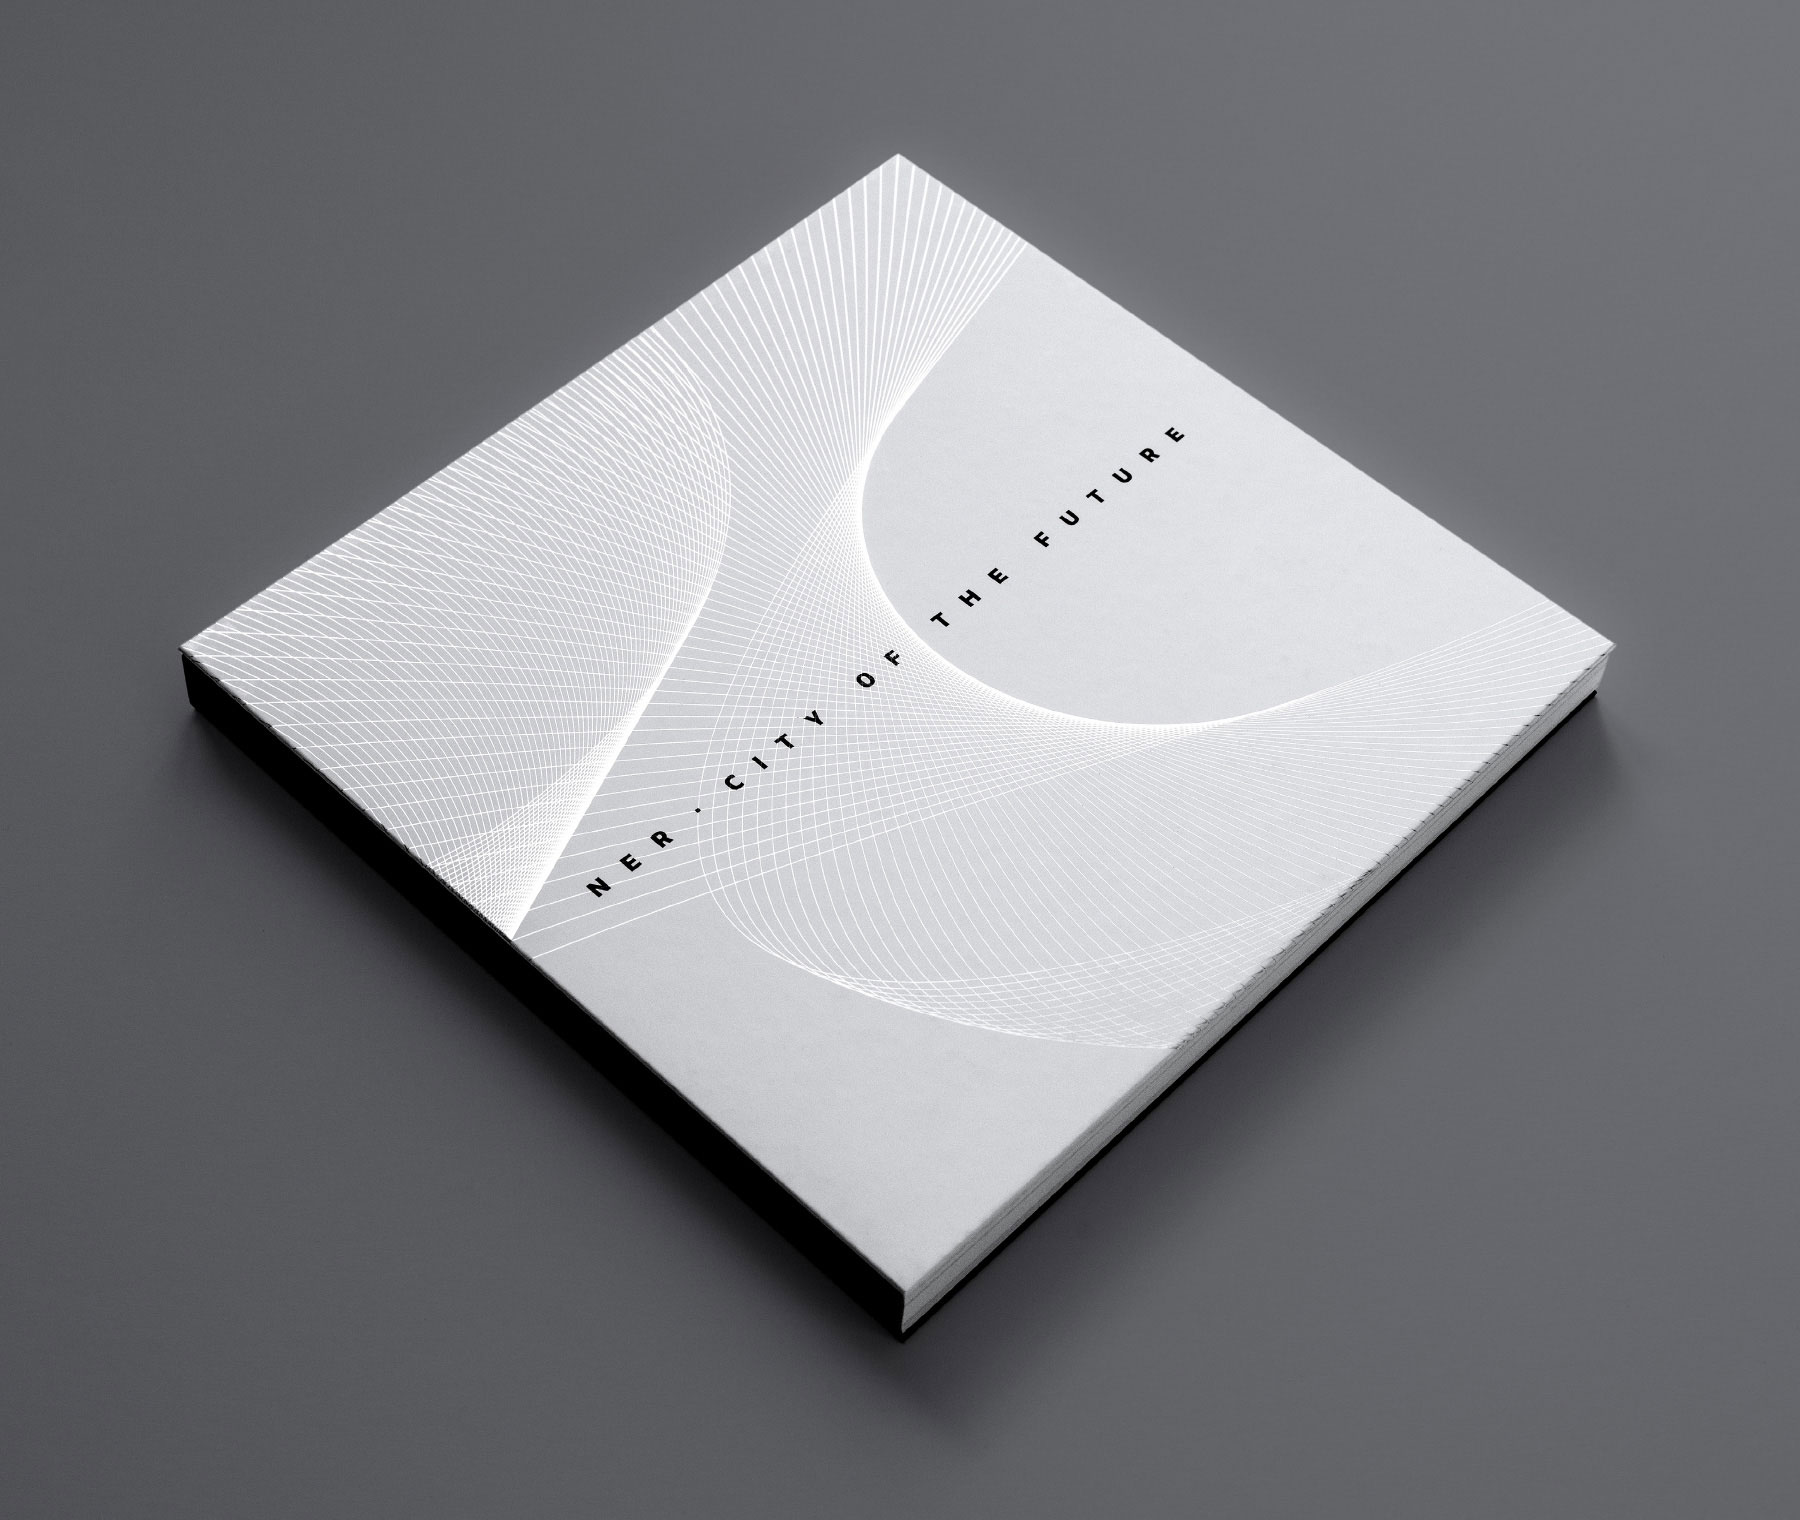 City of the Future book cover in white with thin silver lines in an organic pattern